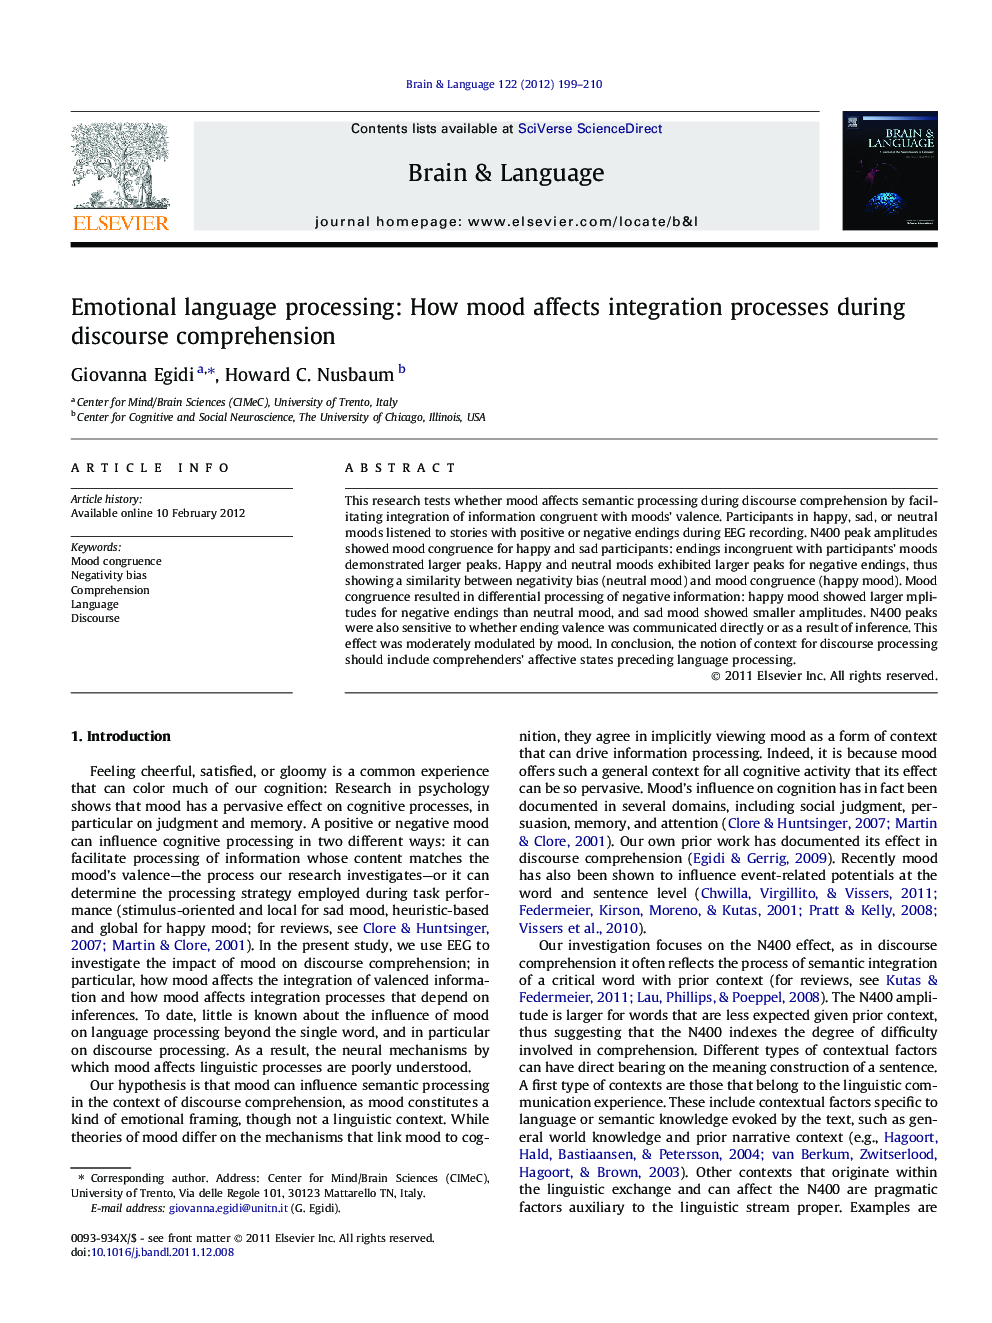 Emotional language processing: How mood affects integration processes during discourse comprehension